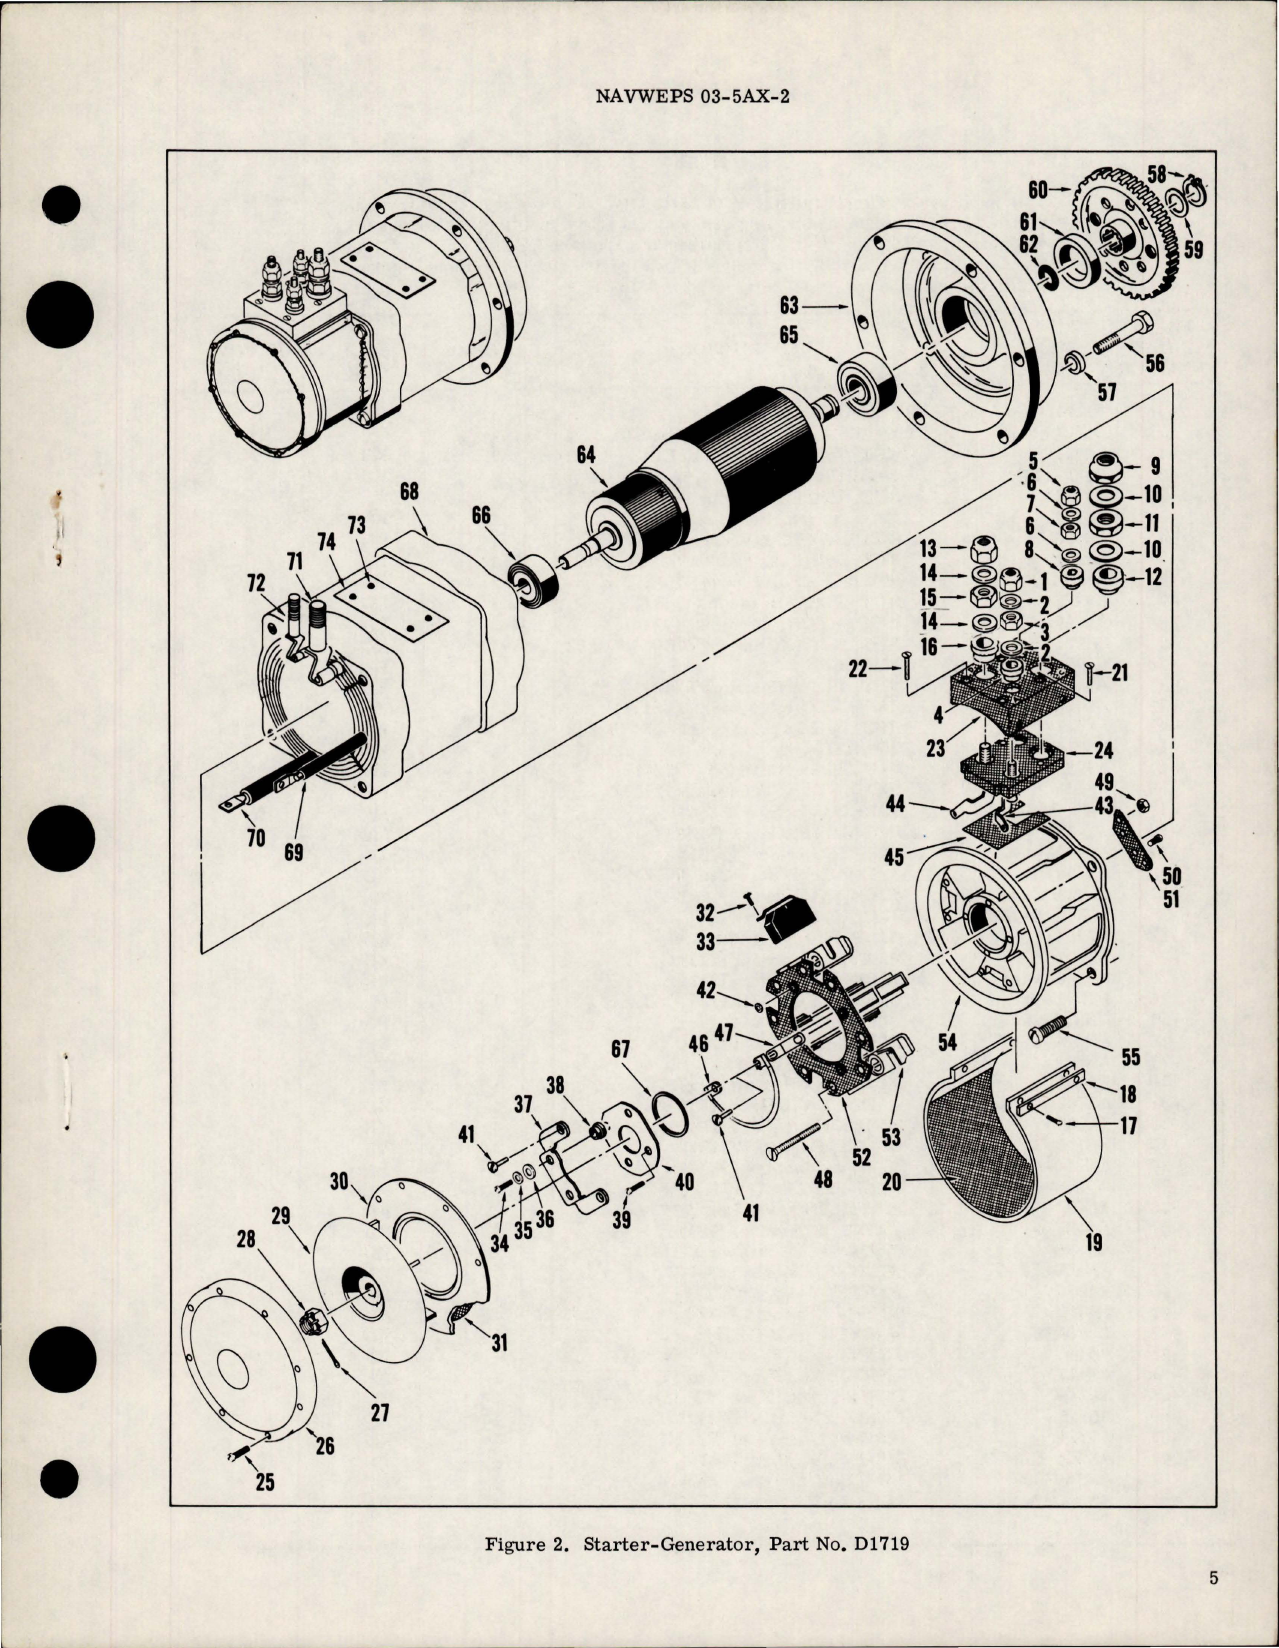 Sample page 5 from AirCorps Library document: Overhaul Instructions with Parts for Starter Generator - Boeing Part 10-40115-1 